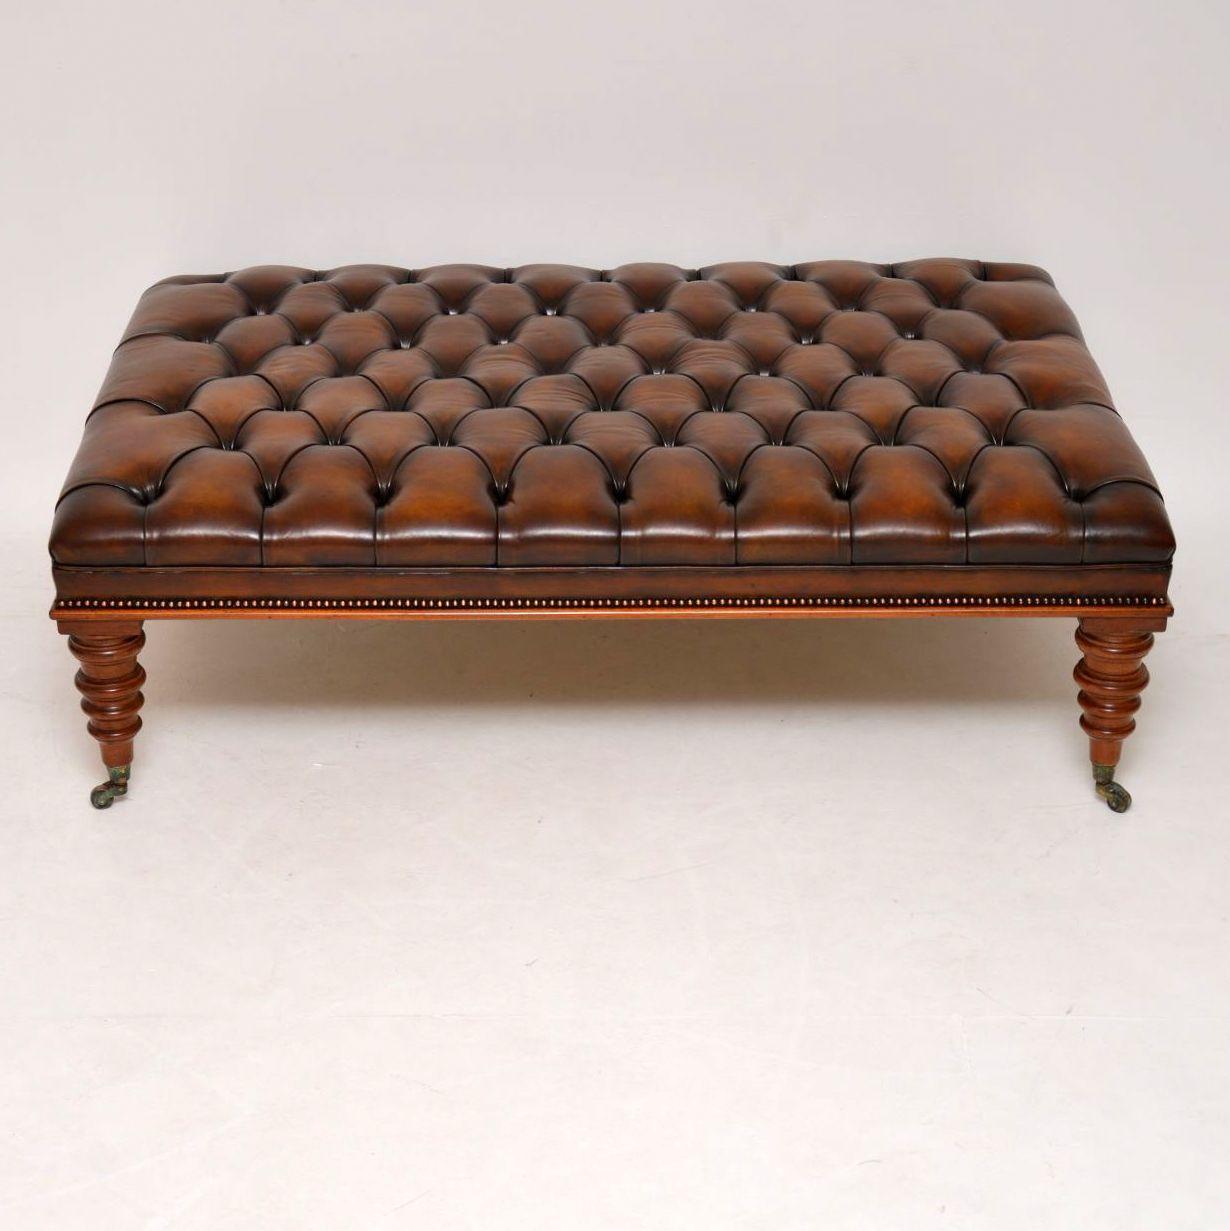 This large antique Victorian style deep buttoned leather stool lends itself to being used as a coffee table too. We have been making these regularly for the last 10 years, normally in this size, but also in other sizes and colors to order. They are